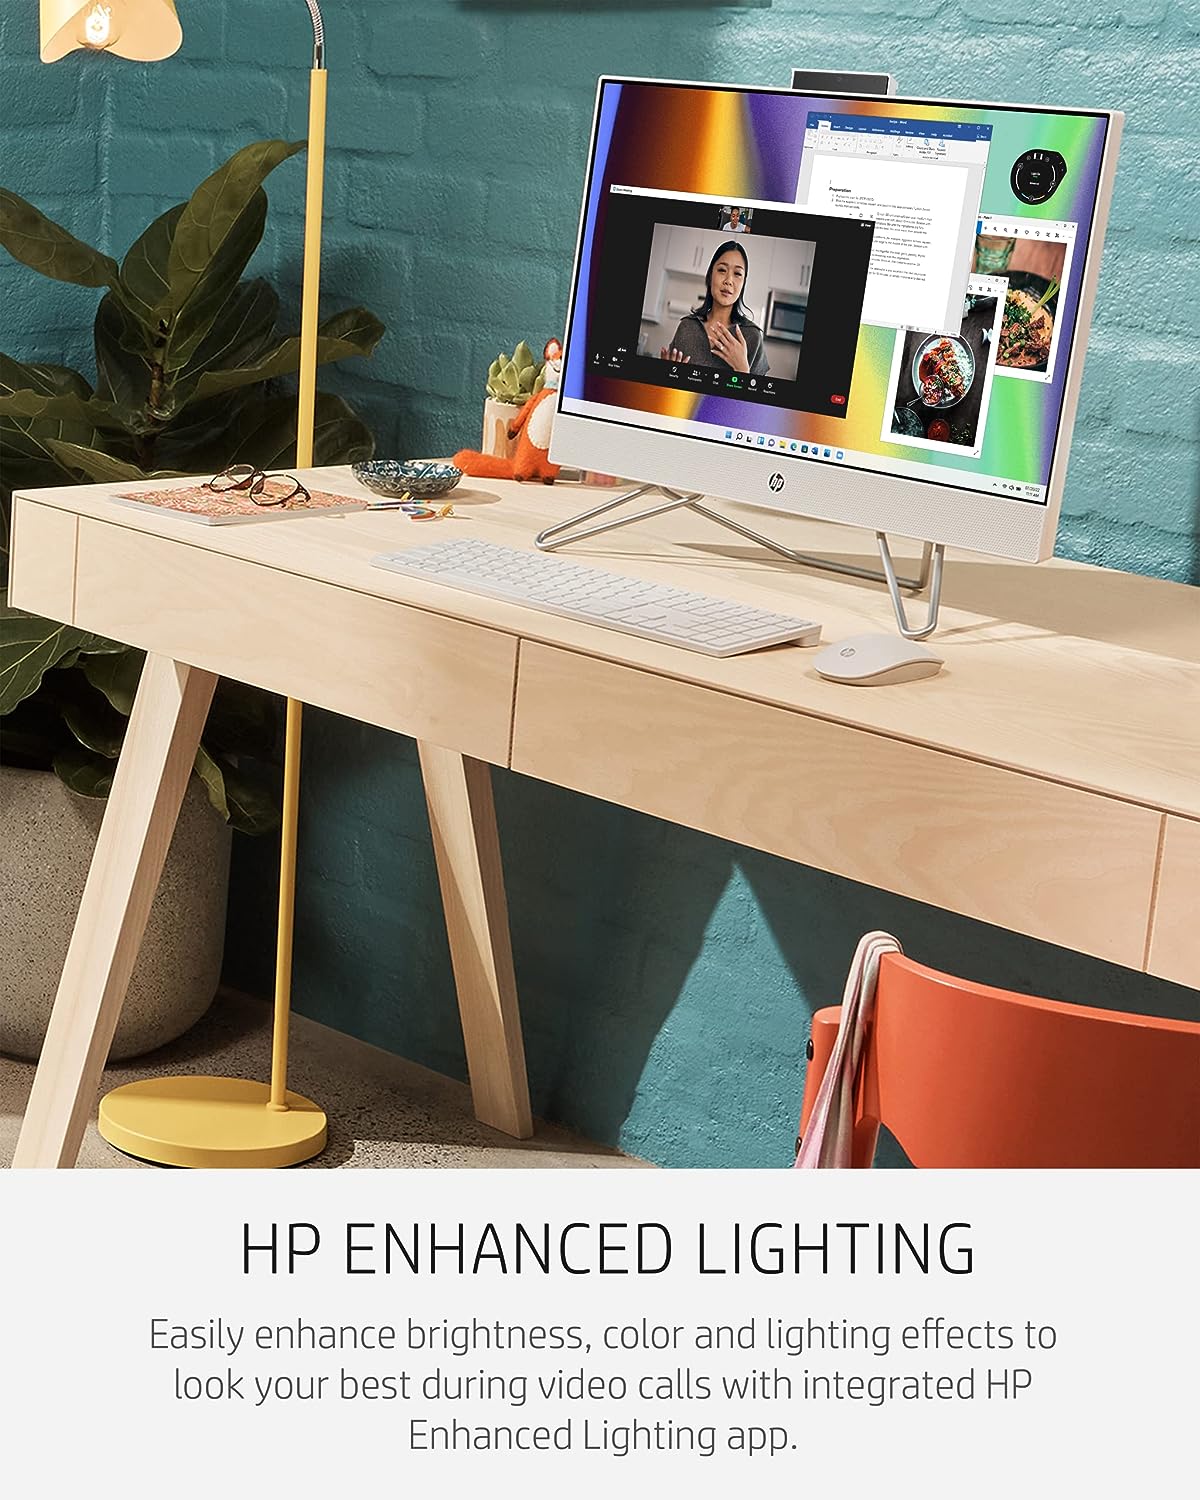 HP 27” All-in-One Desktop PC Review